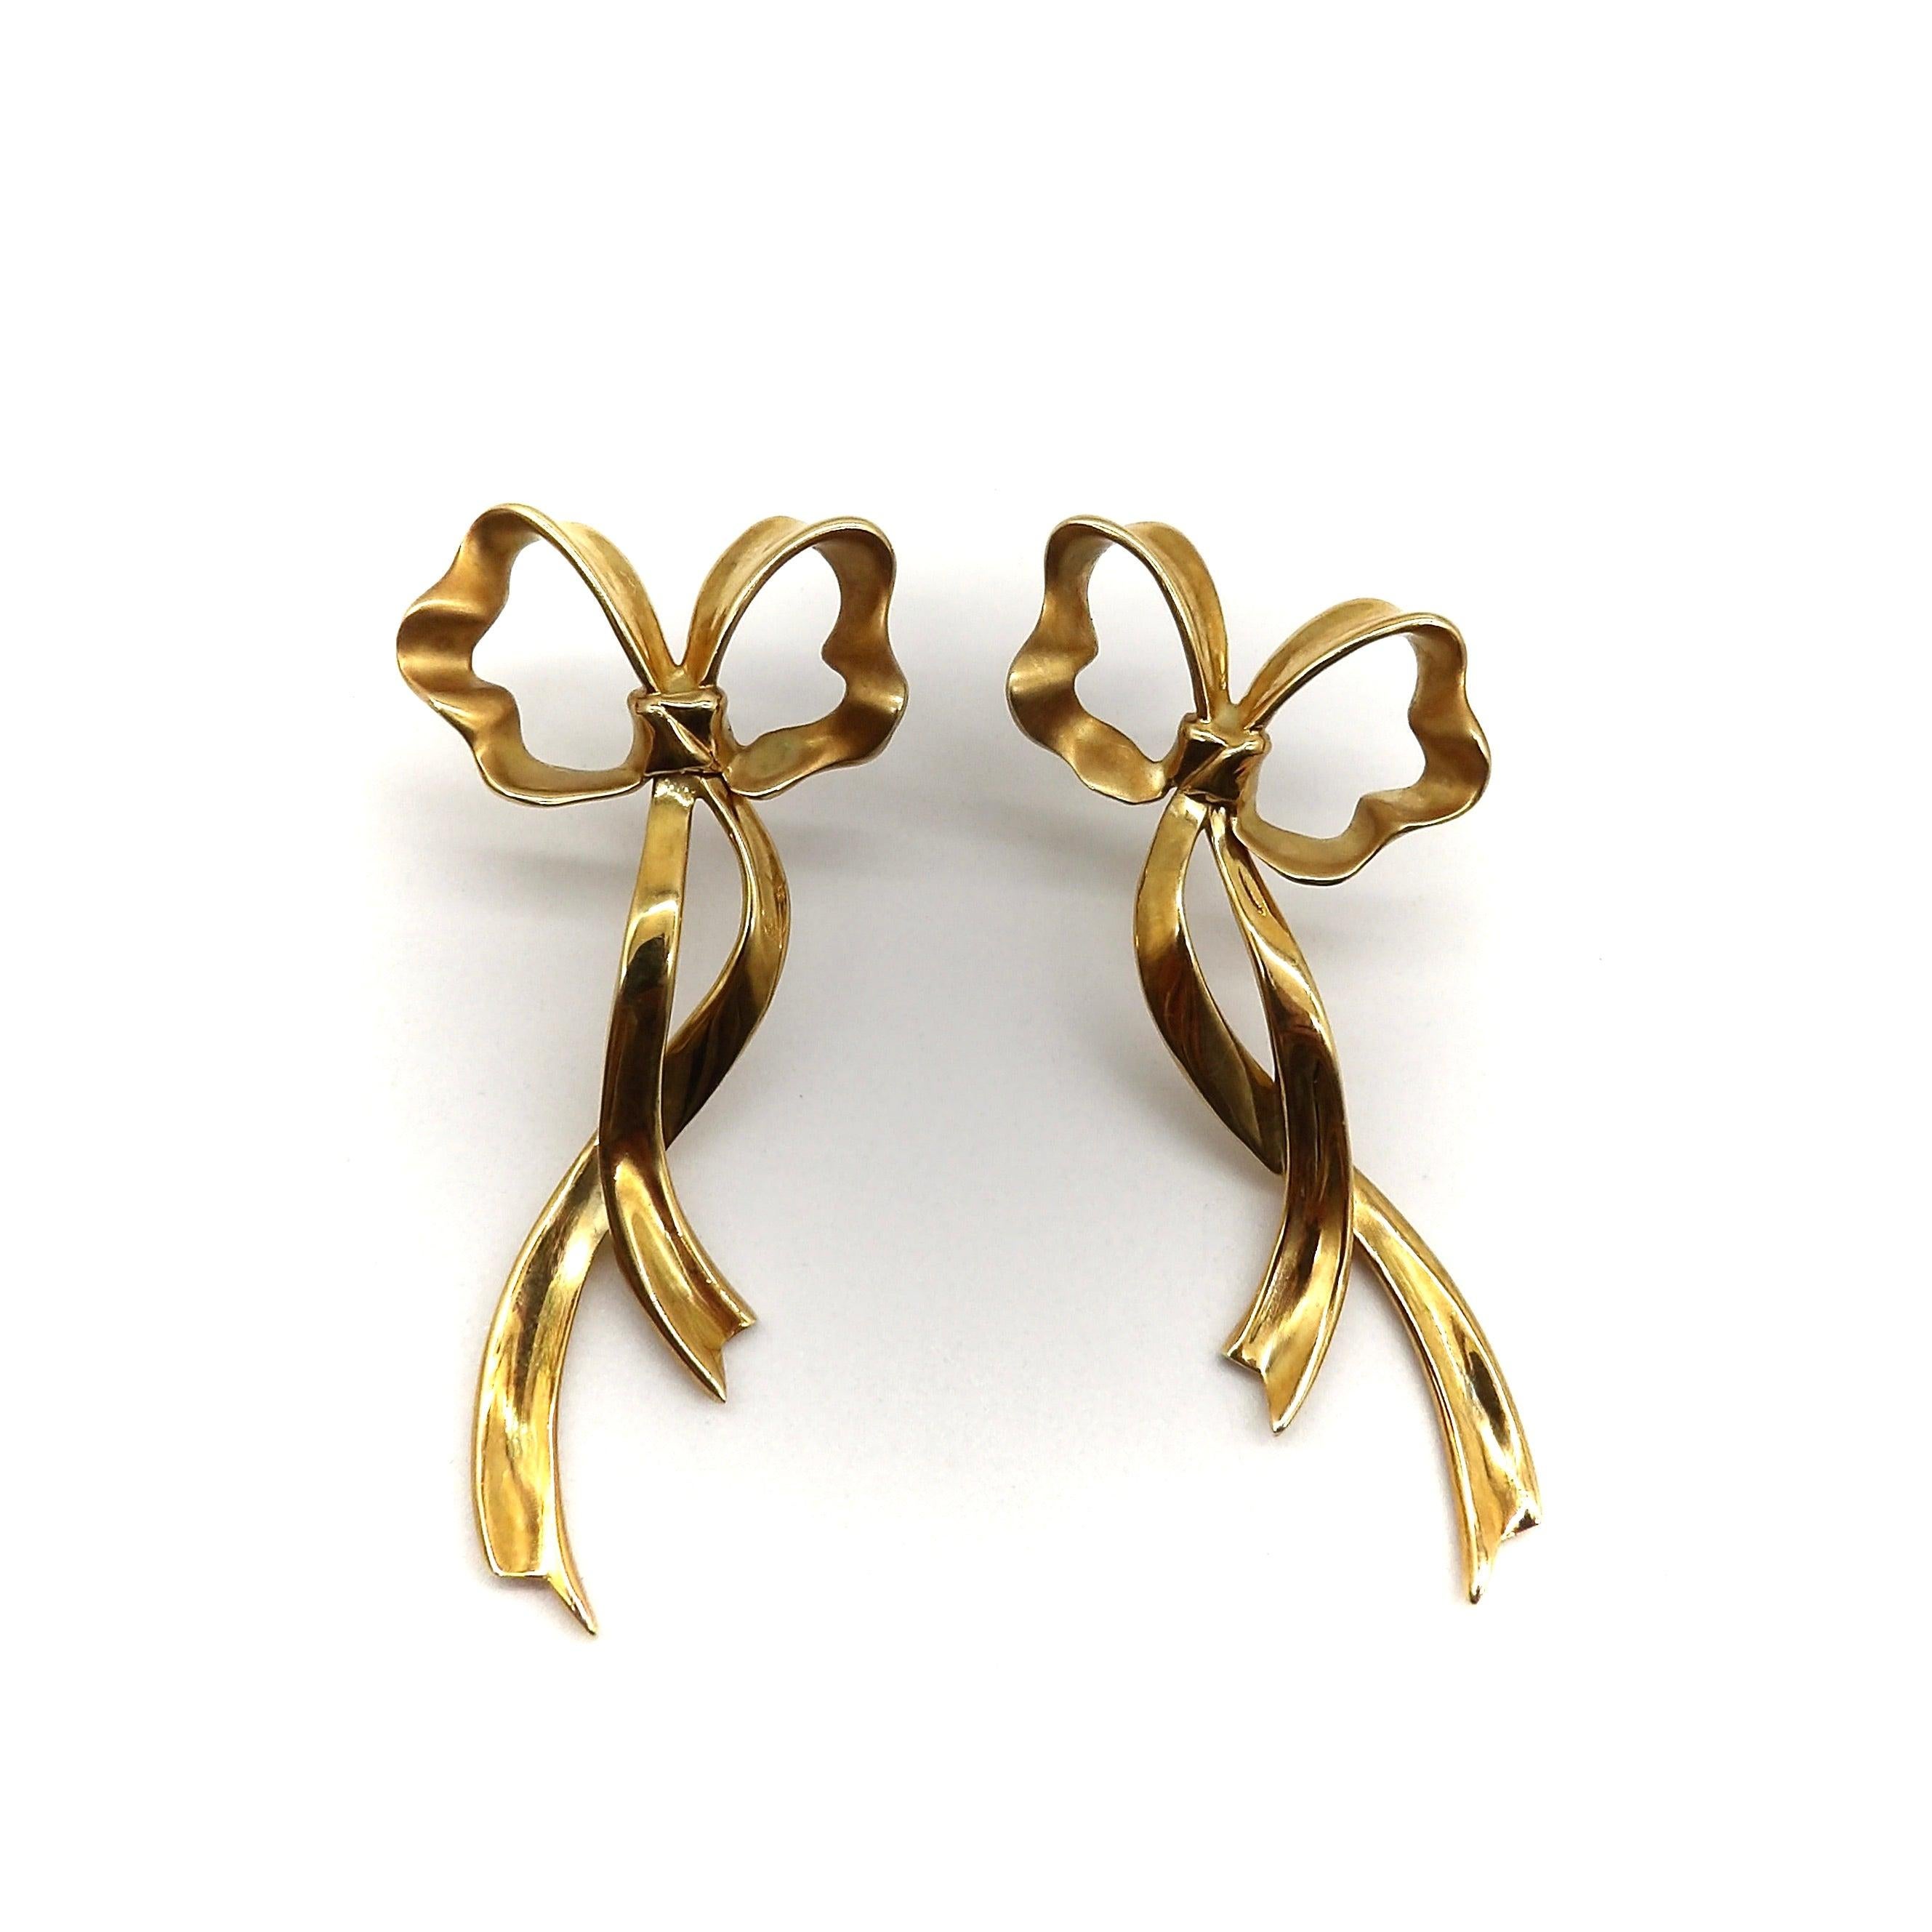 These 18k gold Tiffany & Co. earrings consist of elongated bows with dangling, flowing ribbons. Circa 1985, these bows are a bold take on a classic design, harkening back to the bows seen in retro jewelry of the 1940’s and 1950’s. They capture the